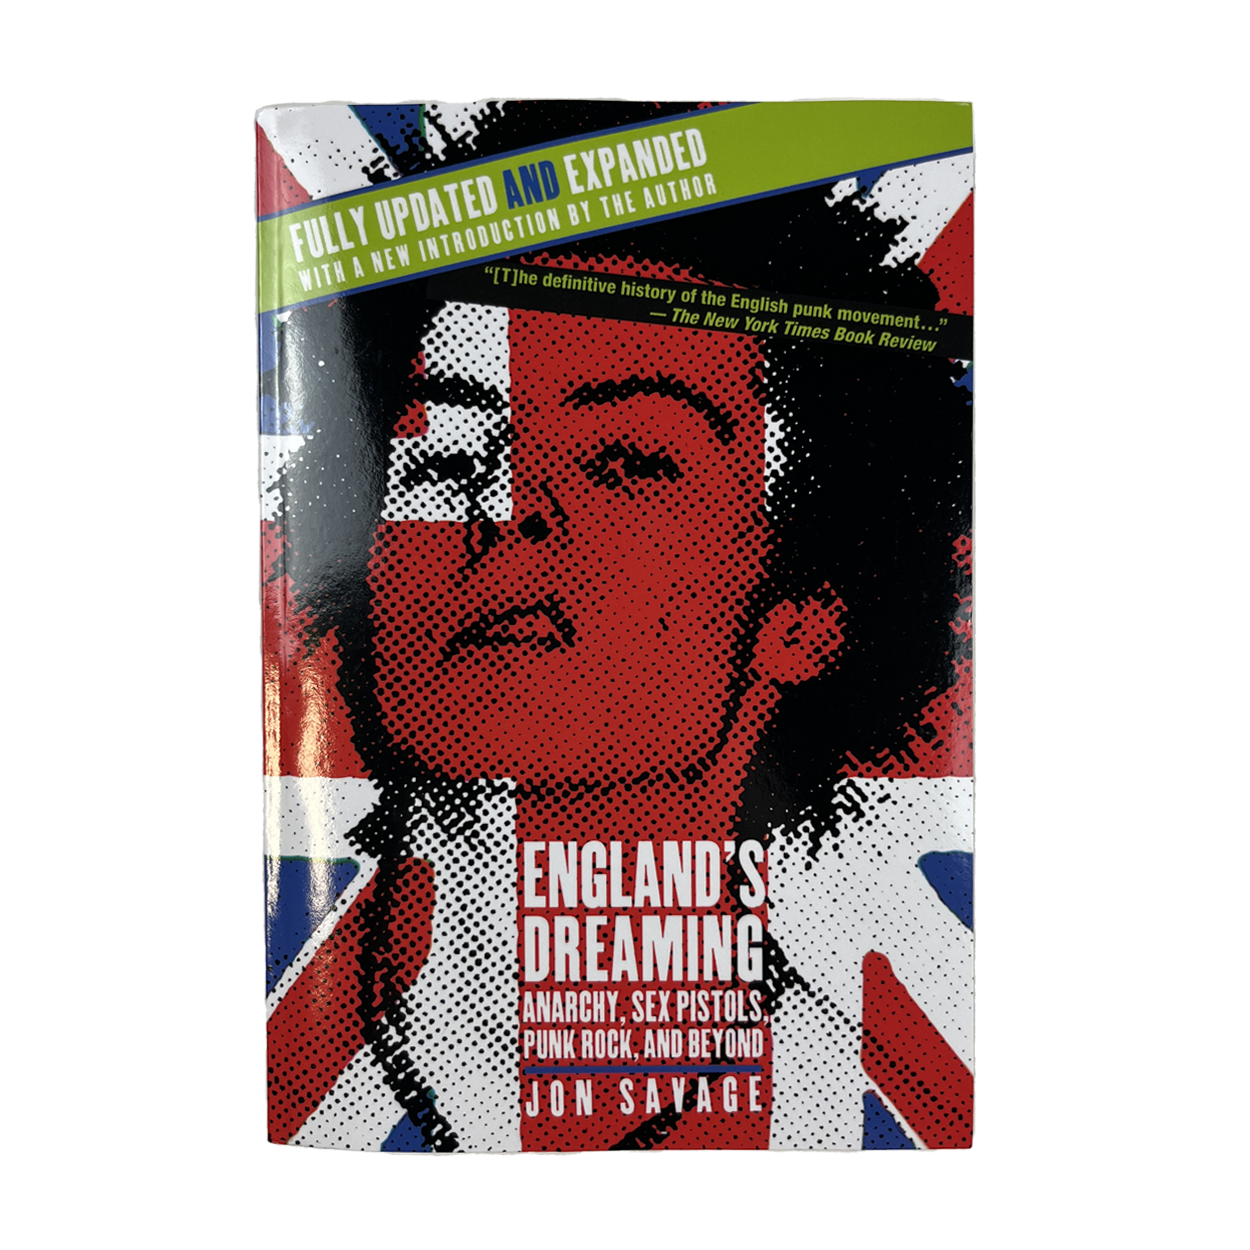 ENGLAND'S DREAMING REVISED EDITION: ANARCHY, SEX PISTOLS, PUNK ROCK, AND BEYOND BOOK